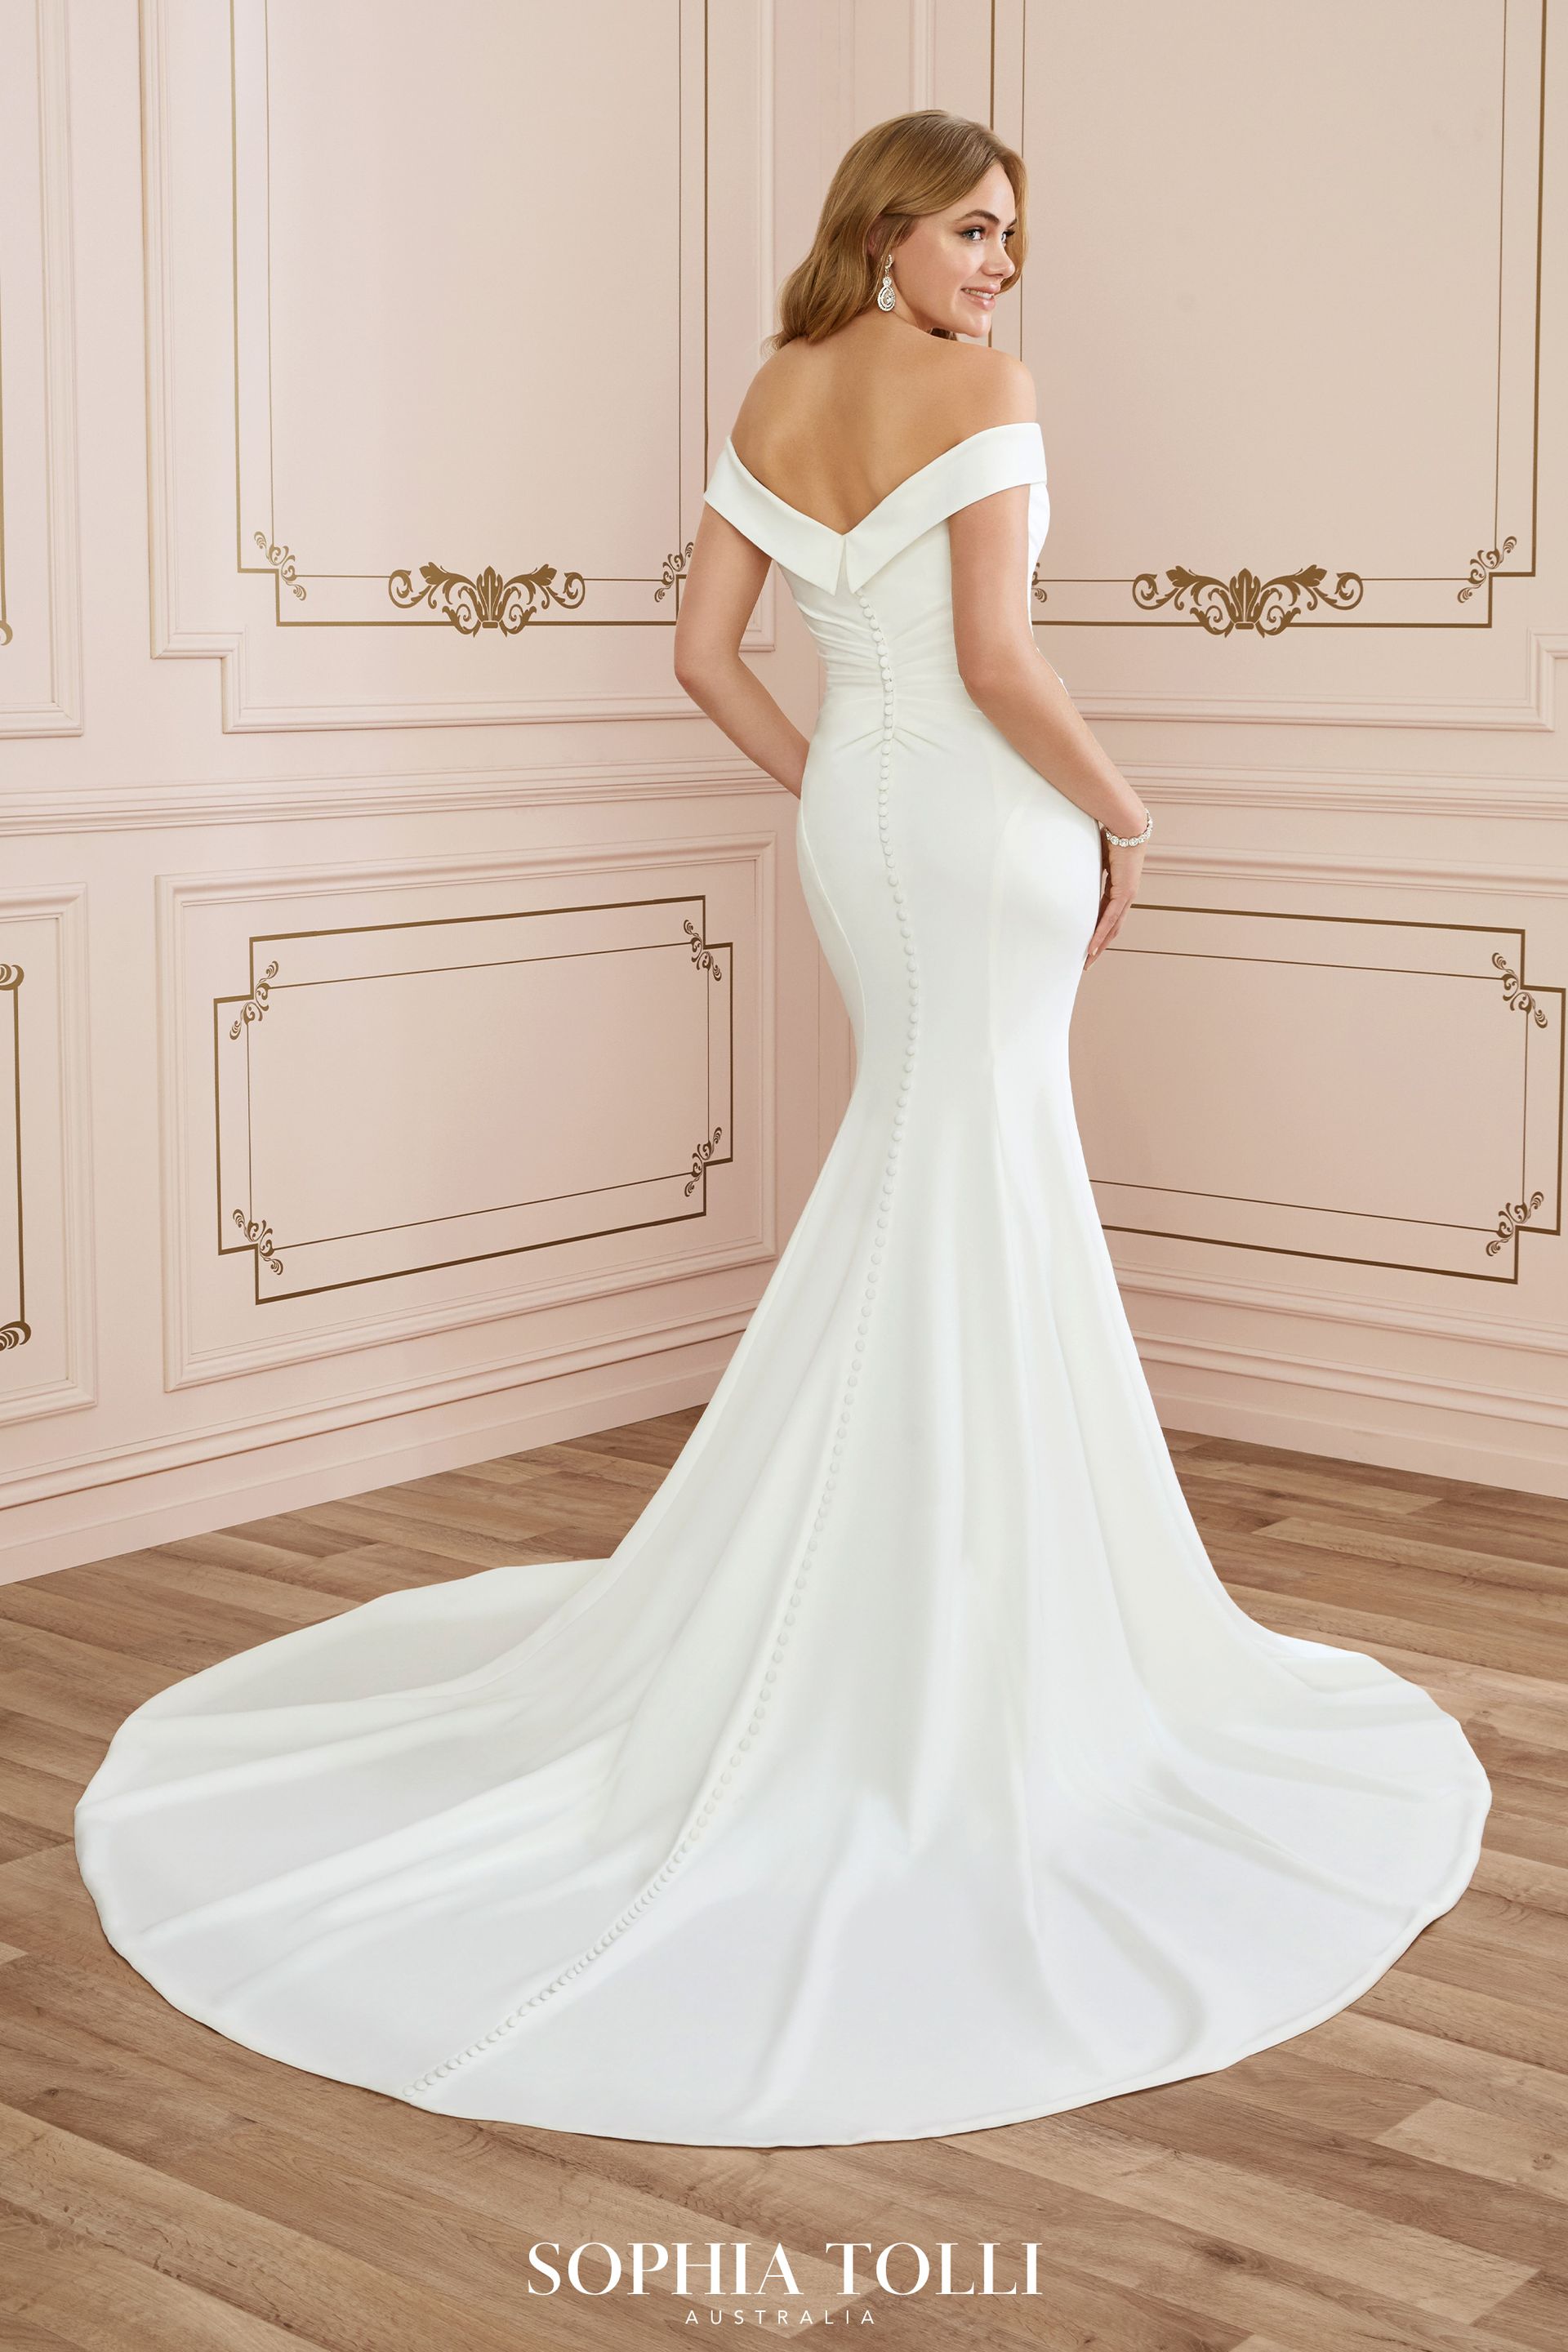 A woman is wearing a white off the shoulder wedding dress.